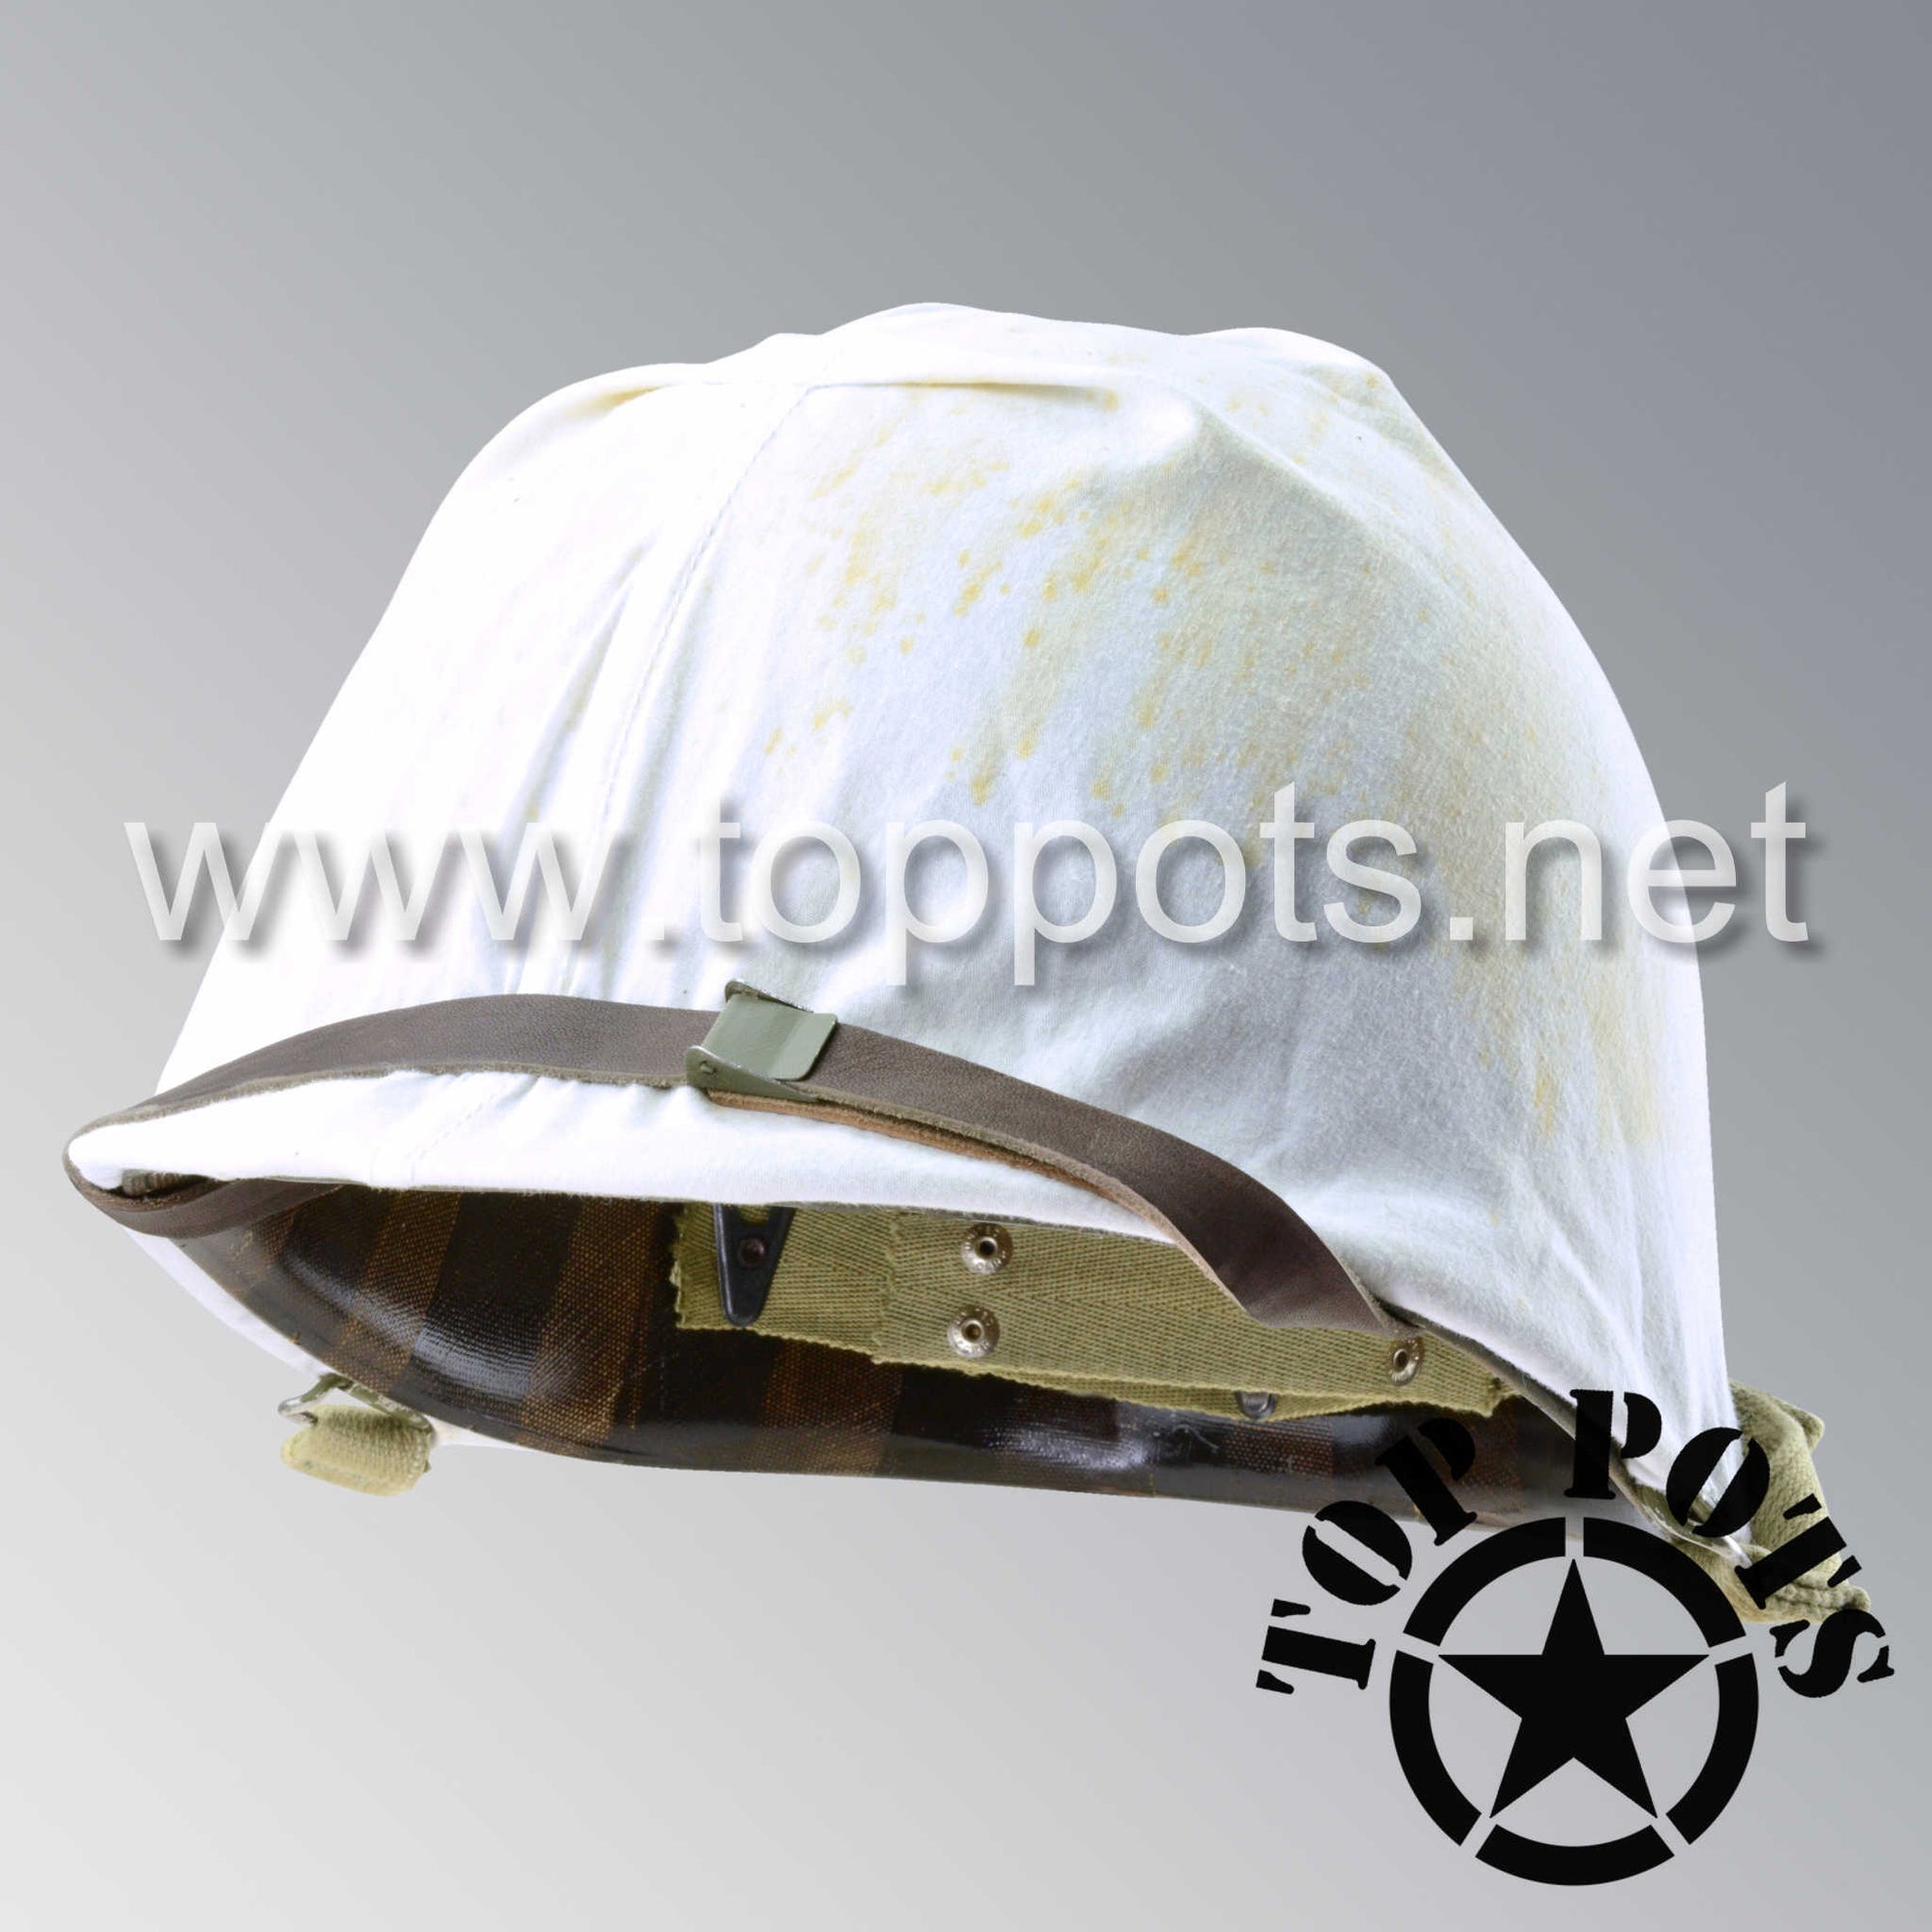 WWII US Army Restored Original M1 Infantry Helmet Swivel Bale Shell and Liner with Winter White Cover